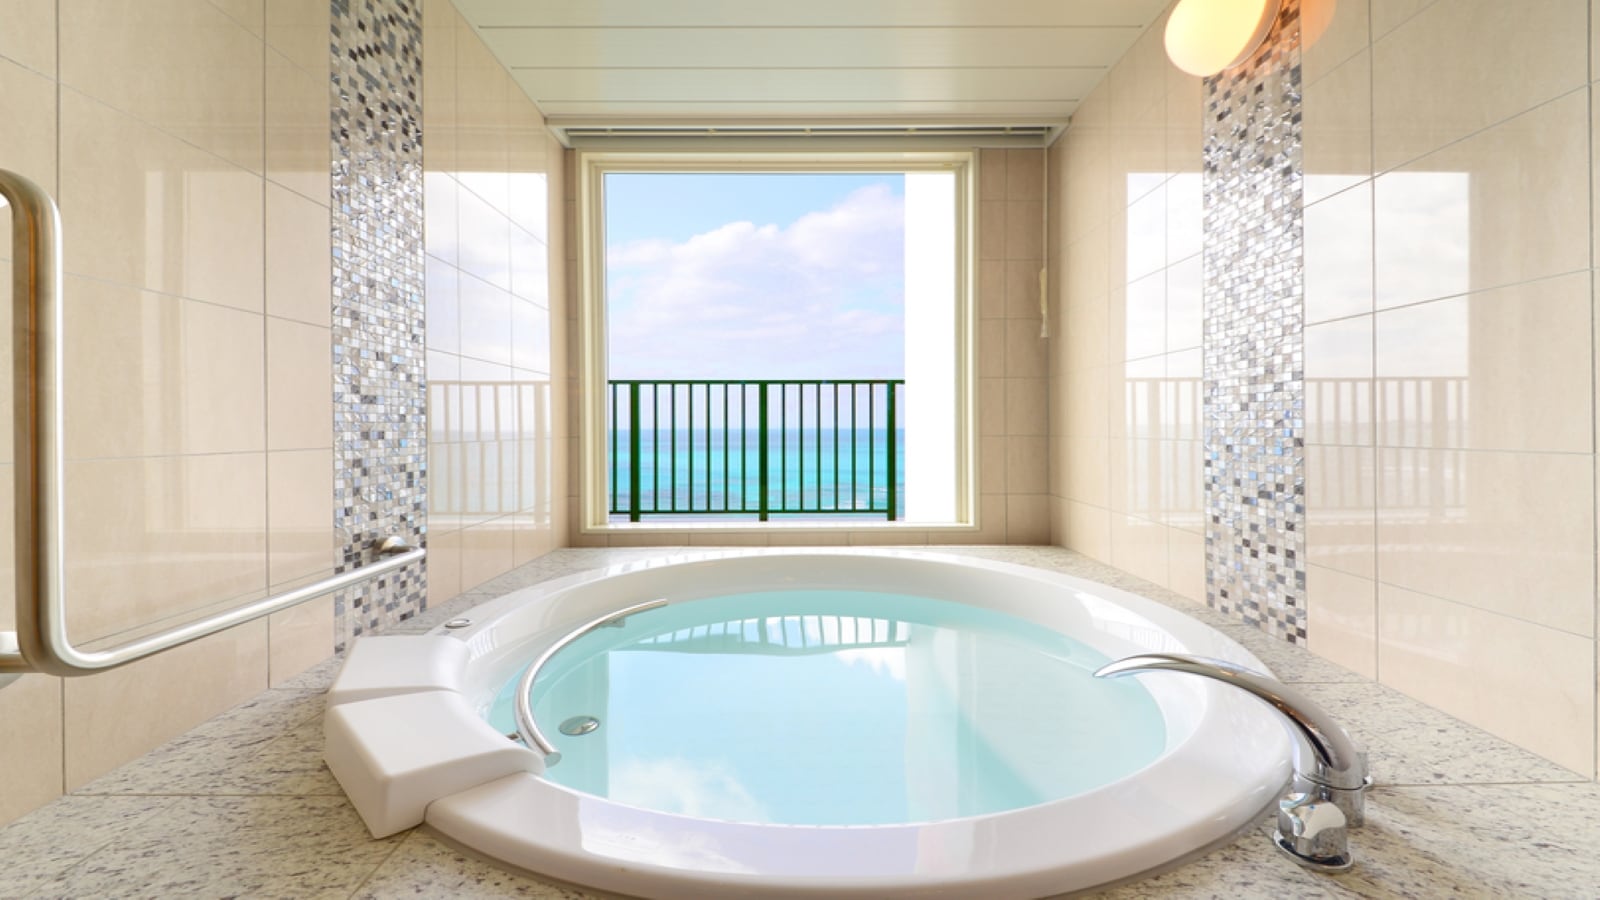 Sunset Junior Suite A special bath where you can enjoy bathing while watching the beautiful sunset